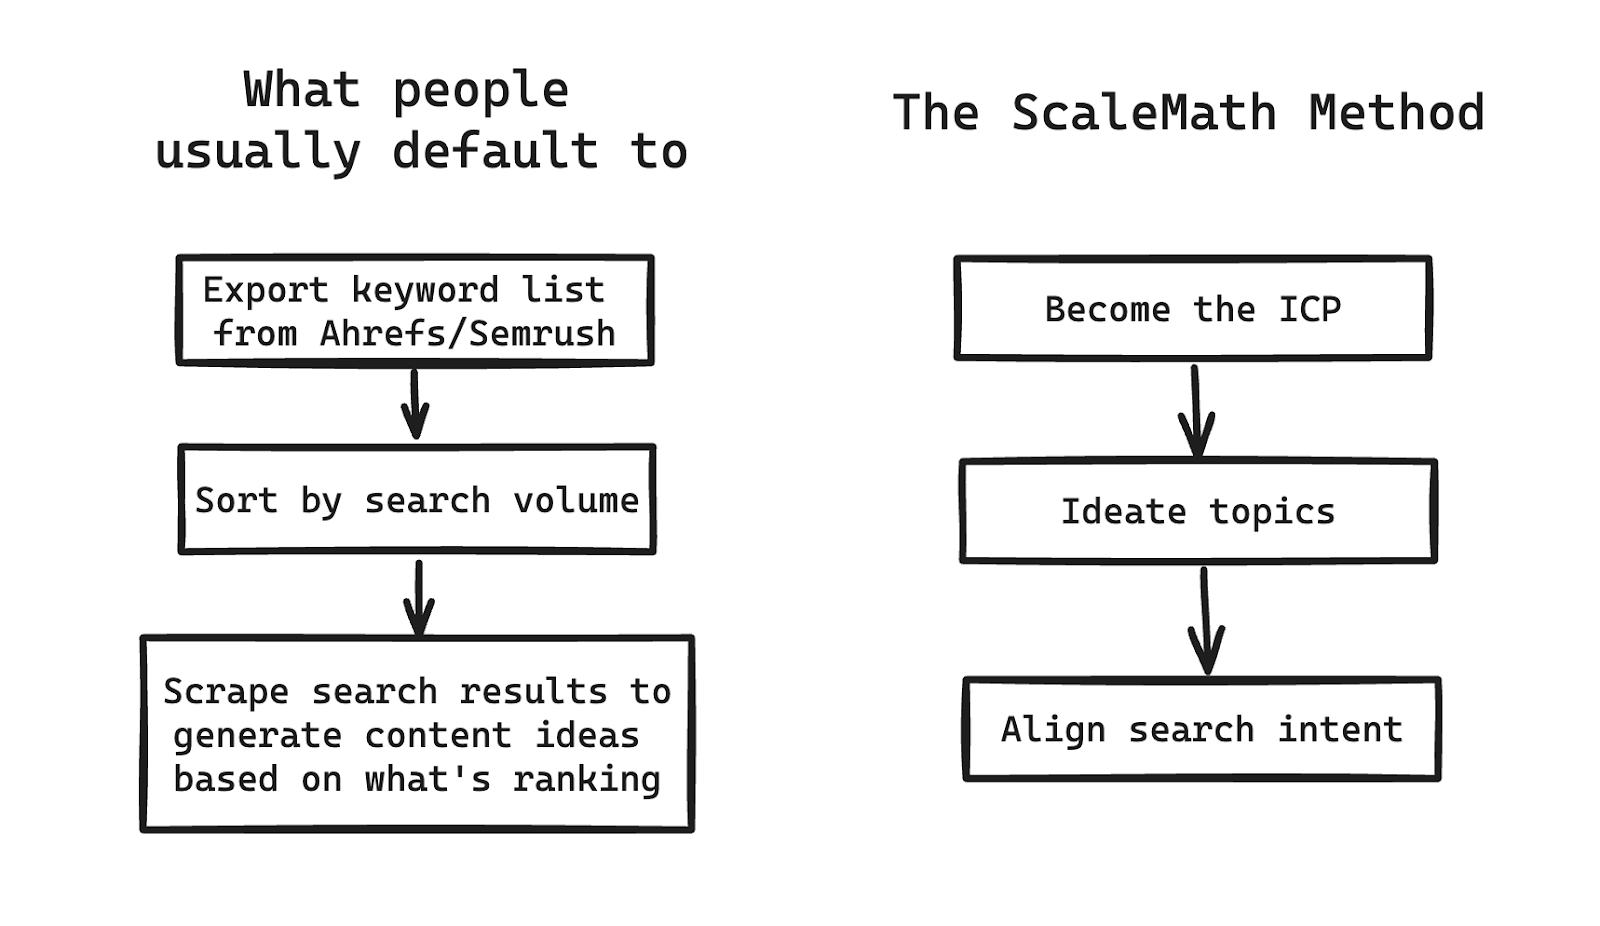 The ScaleMath Method vs. The Old Way